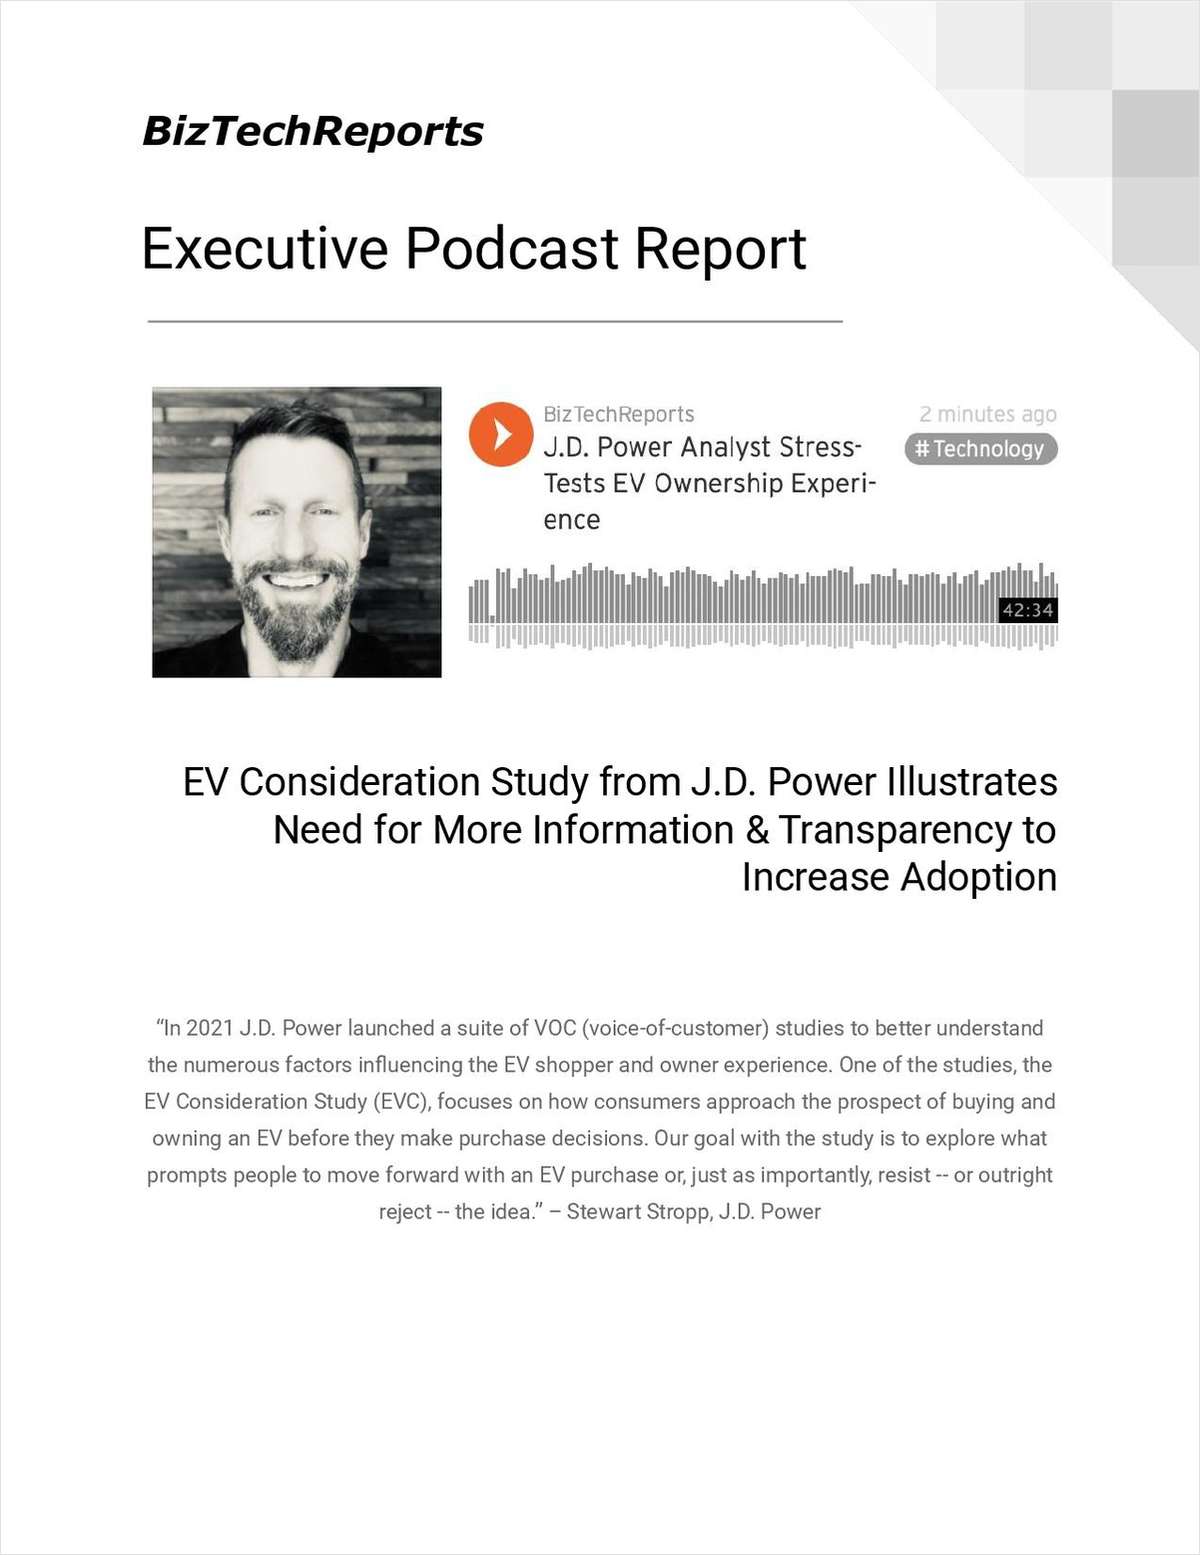 EV Consideration Study from J.D. Power Illustrates Need for More Information & Transparency to Increase Adoption